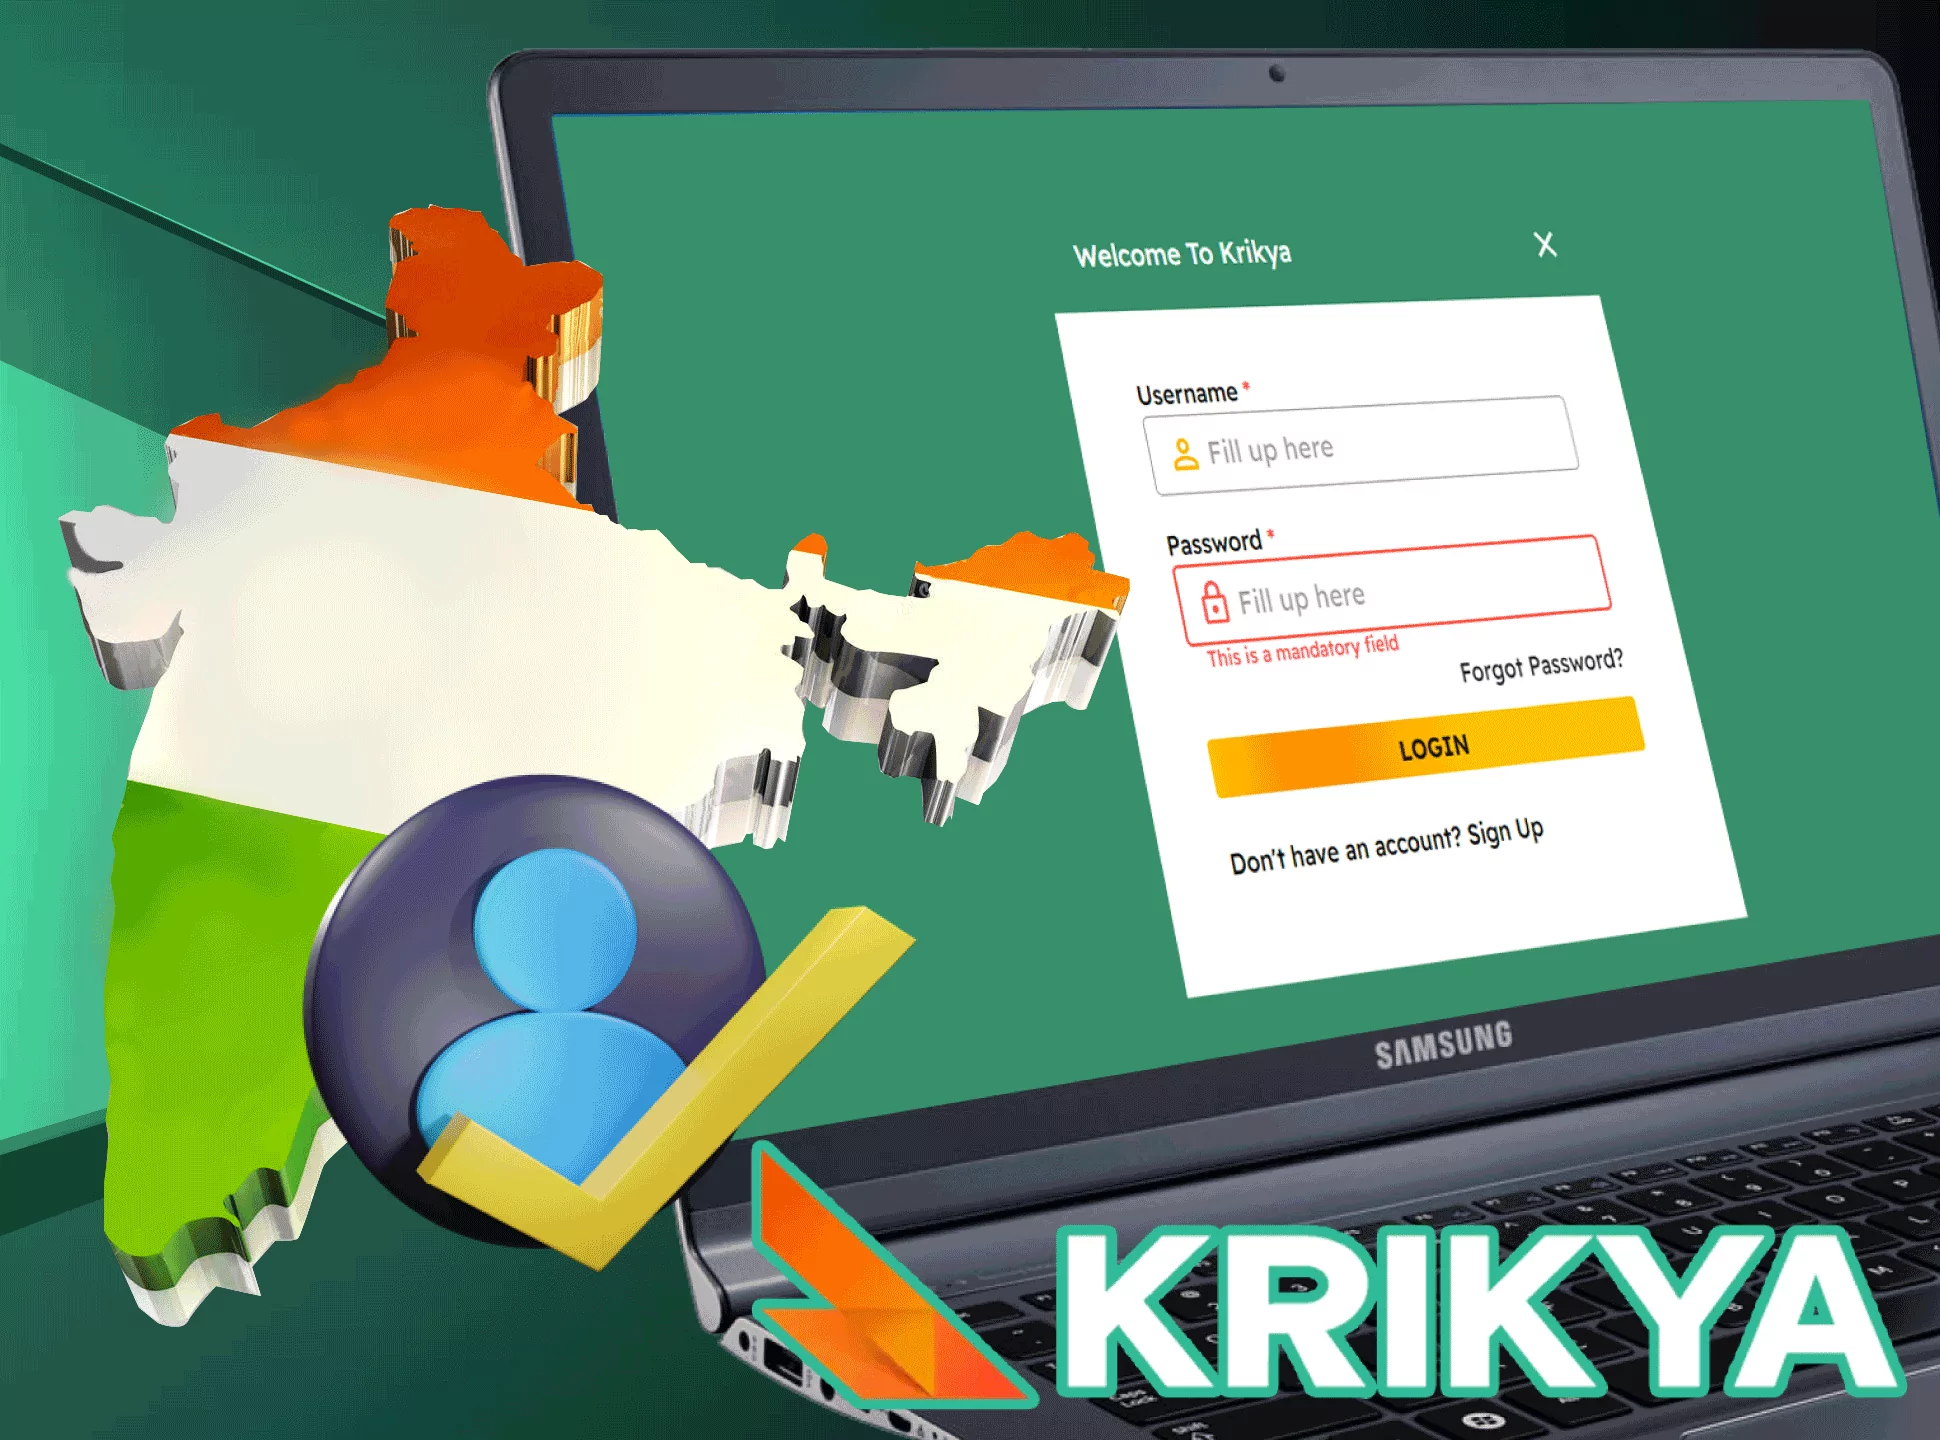 Use your username and password to get access to Krikya.